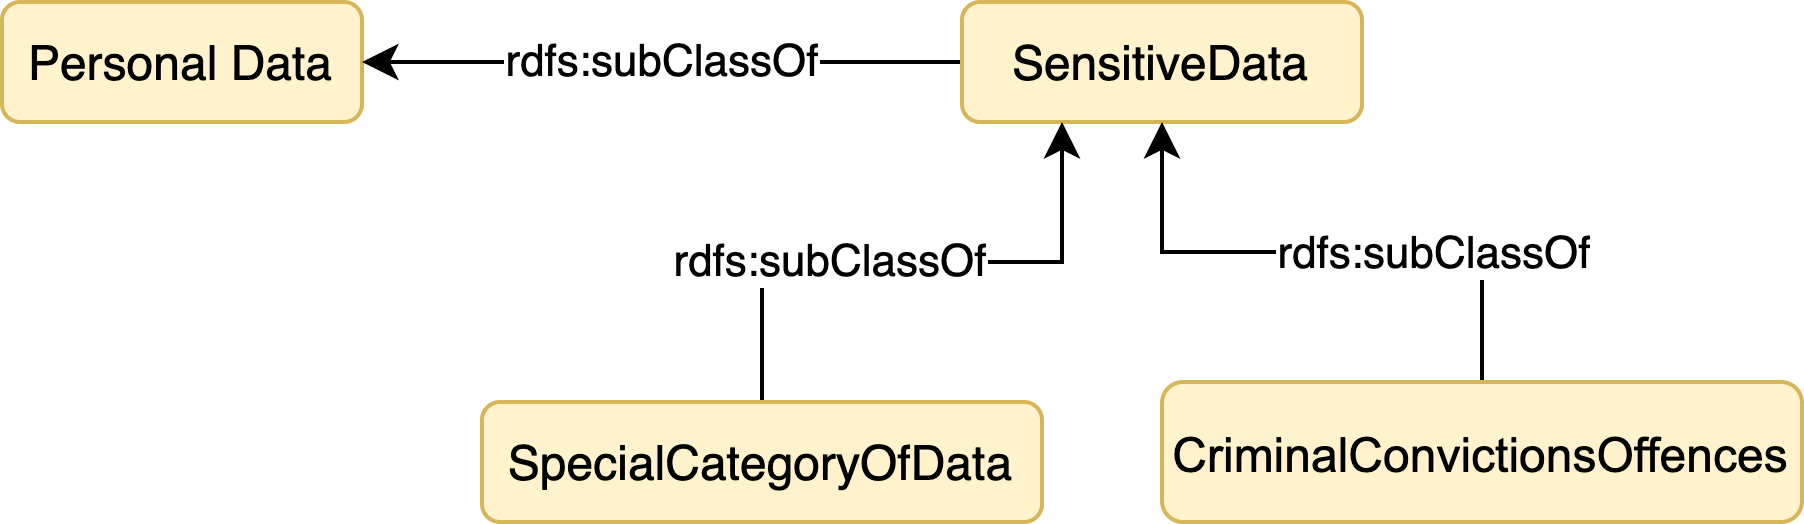 Concepts associated with Processing of sensitive data